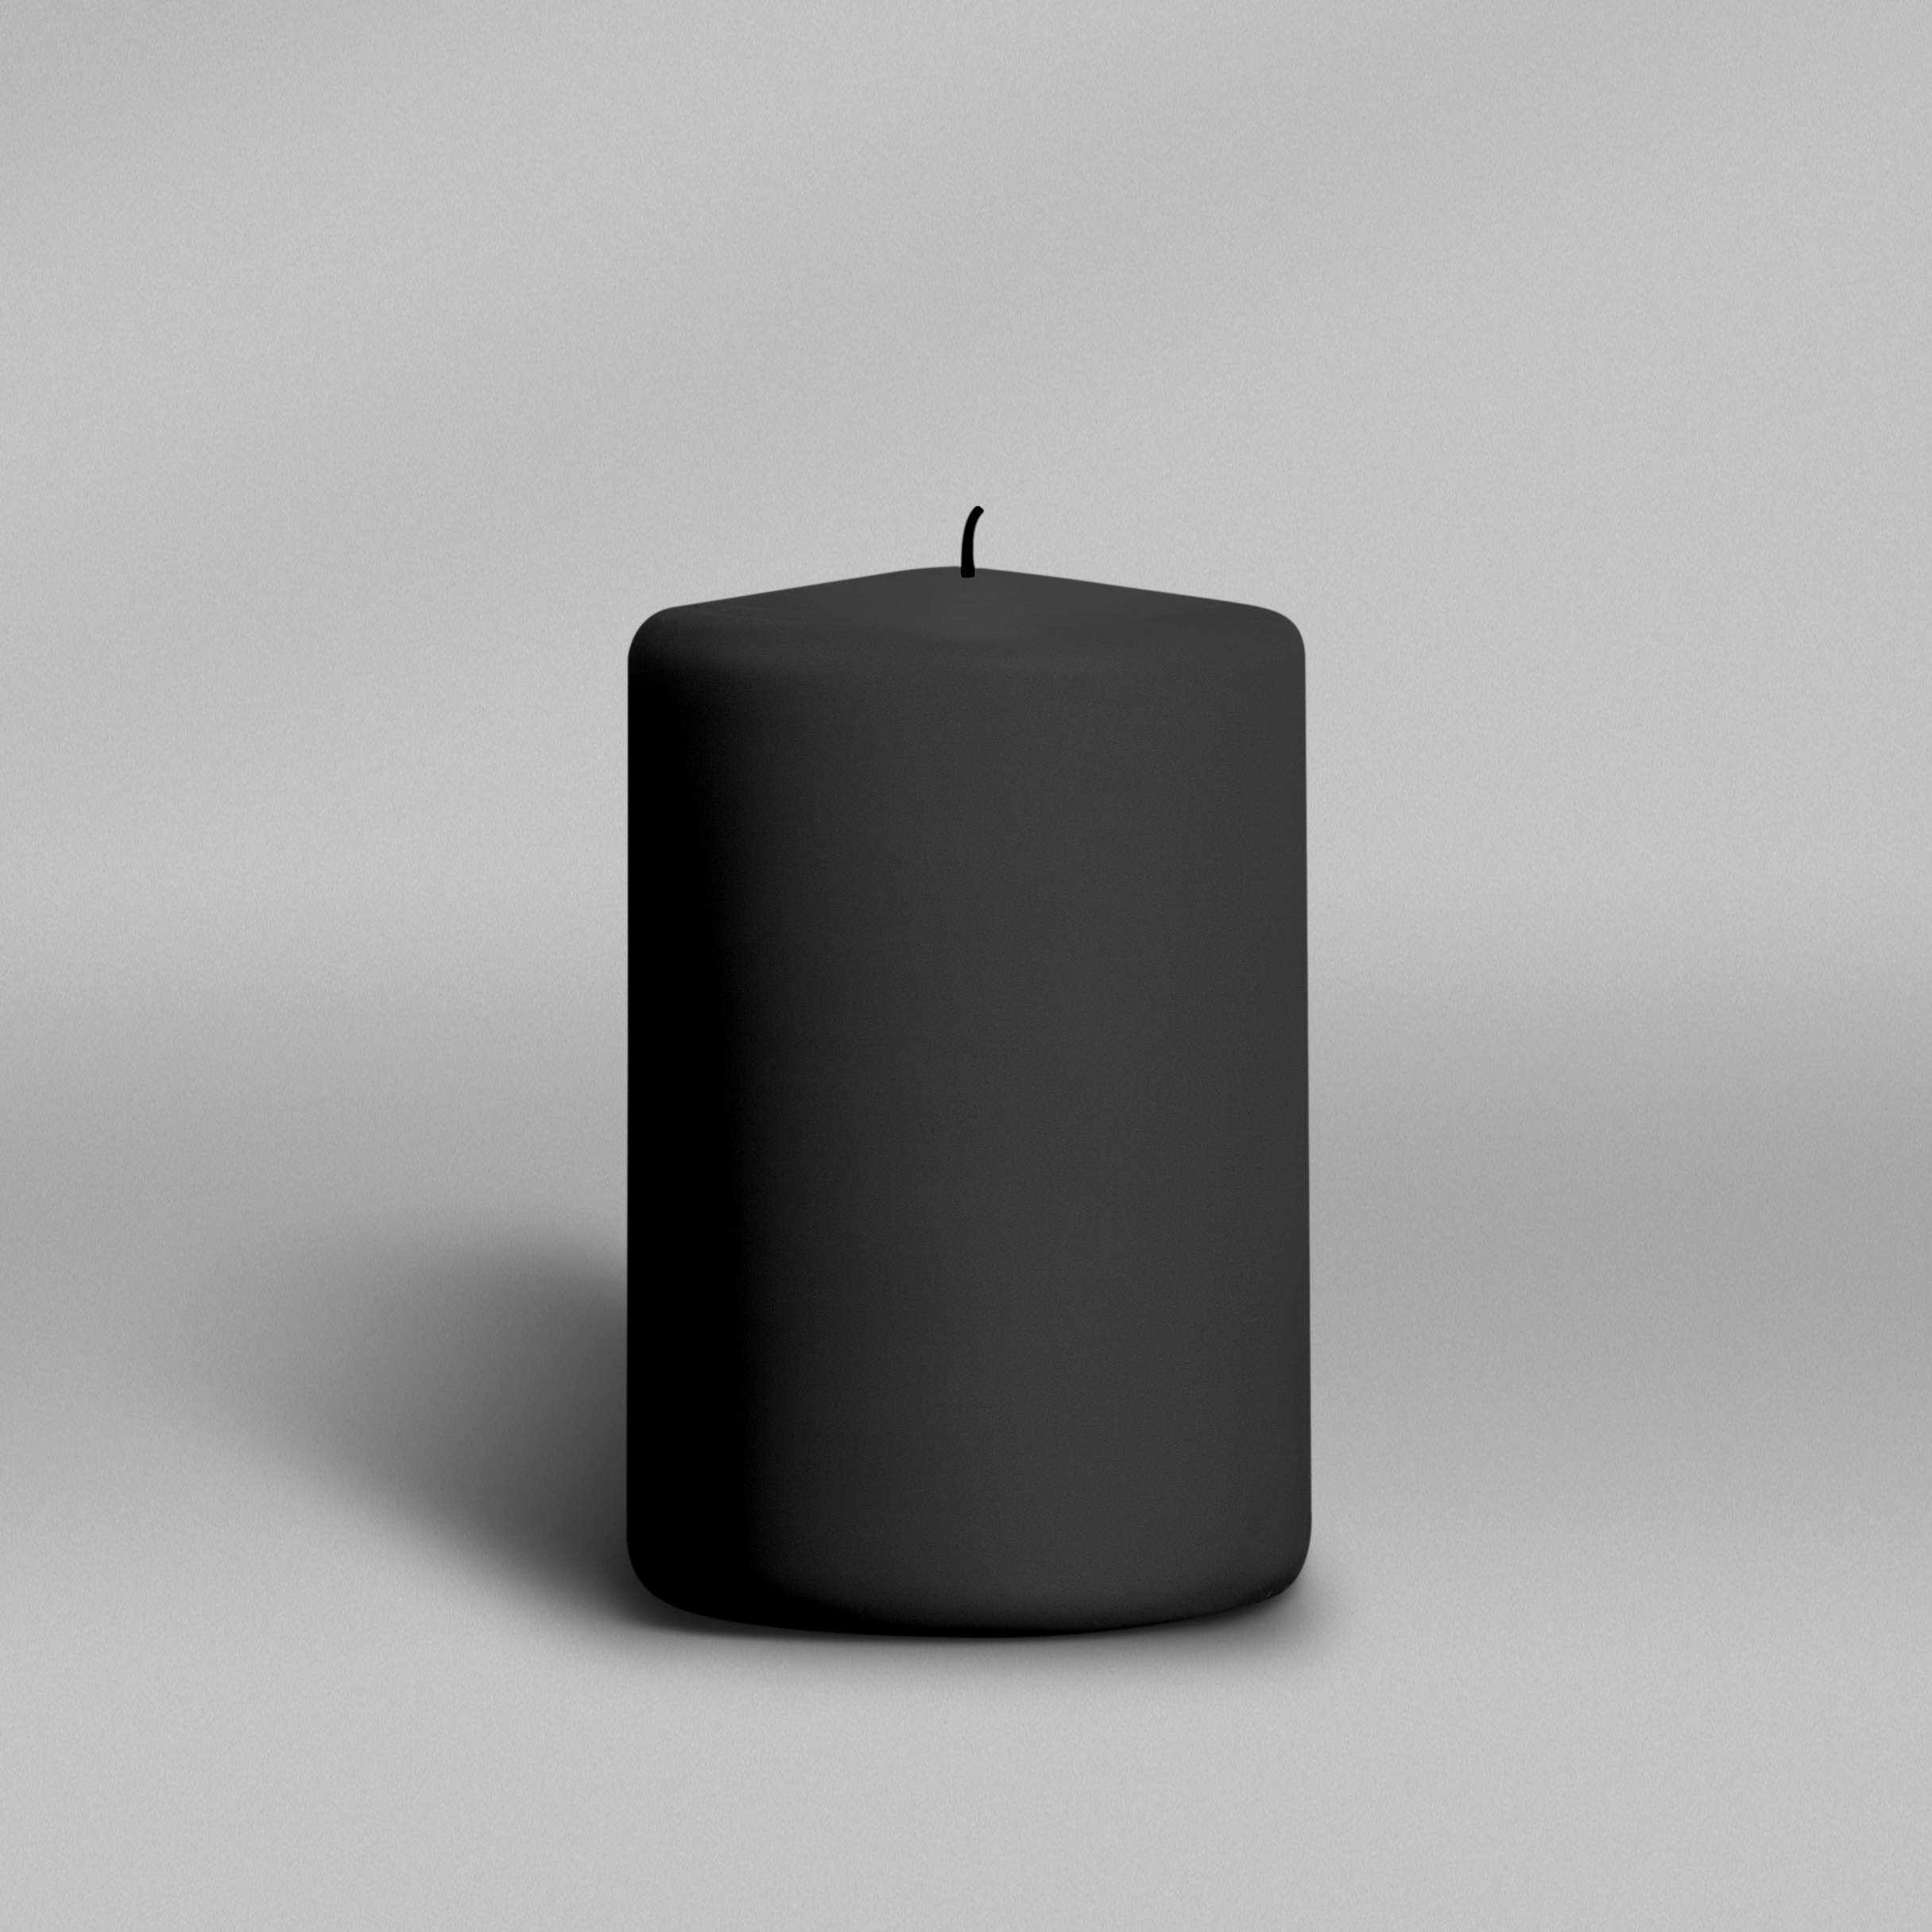 Black Candle